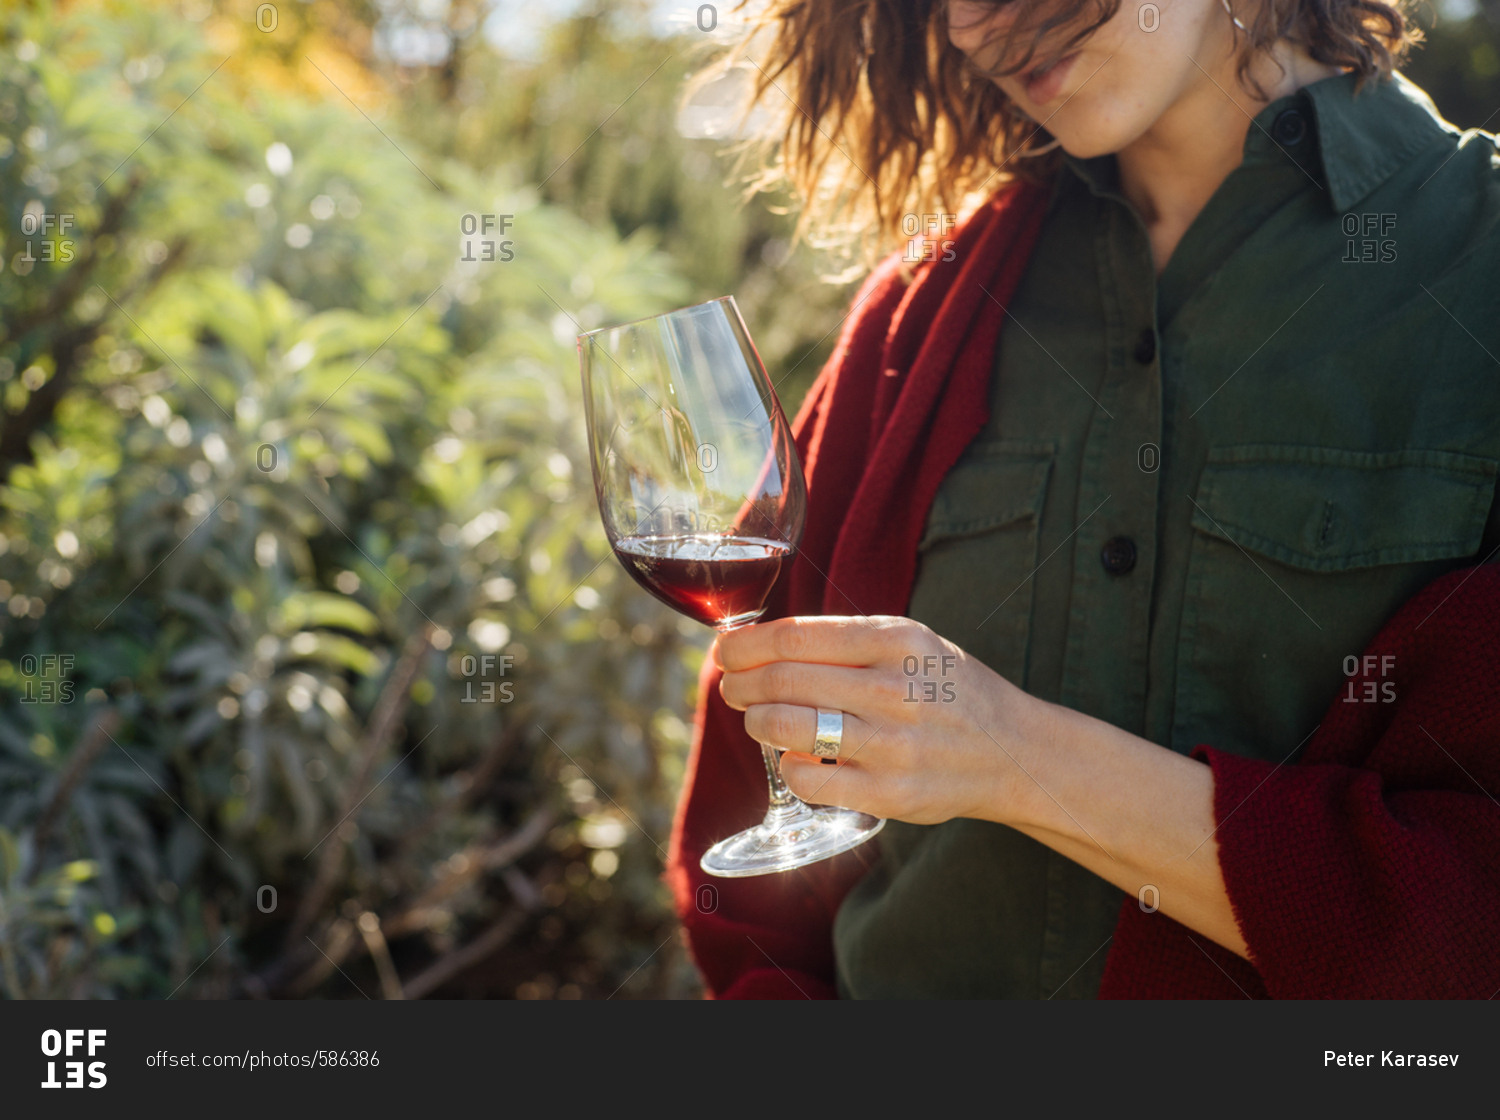 Woman standing outside swirling a glass of red wine